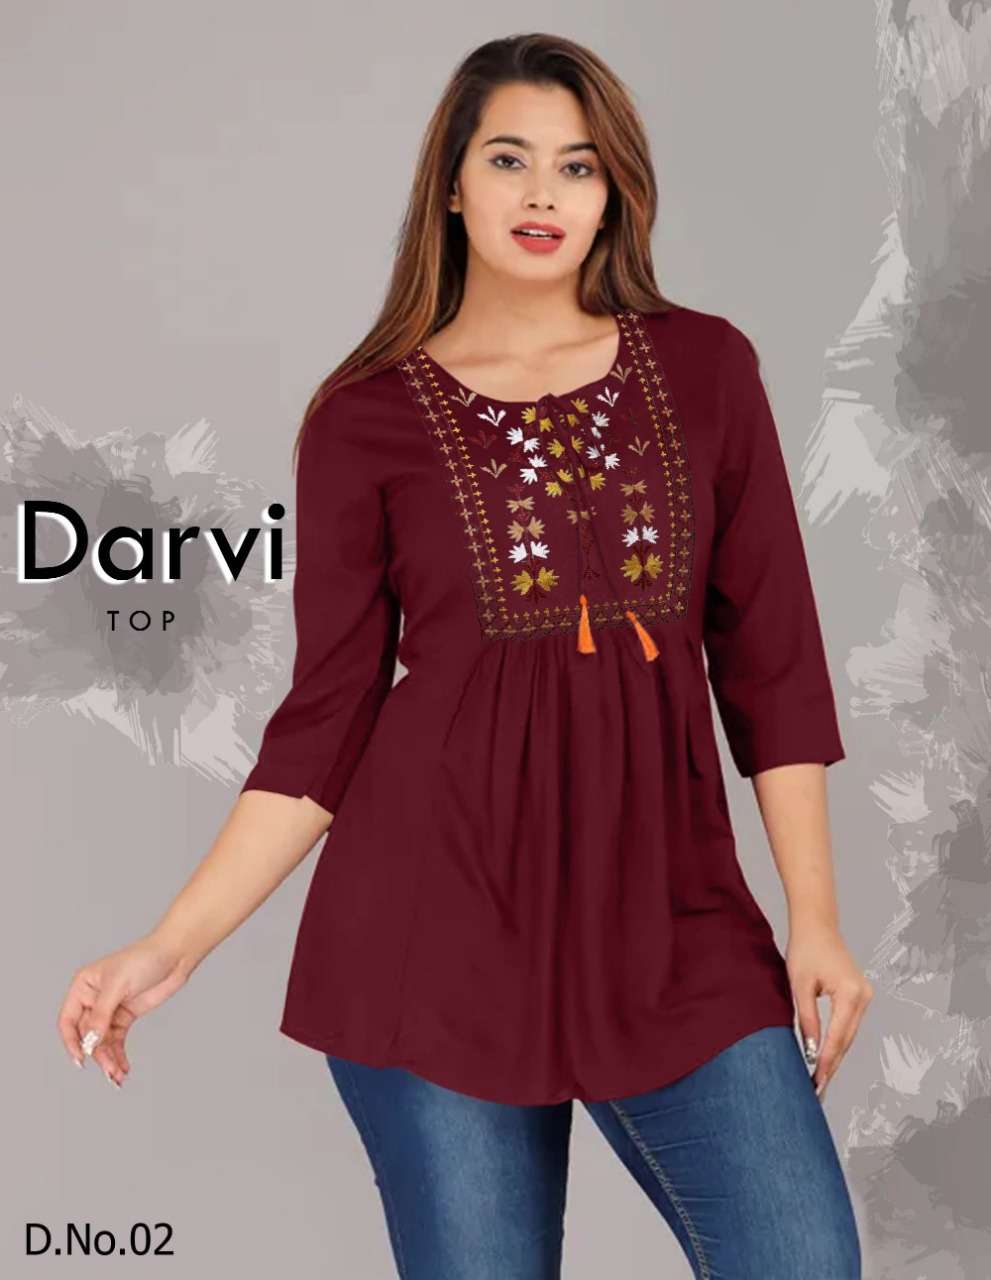 western tops darvi top colour 5 fabric cotton thread work size m to xxl western tops stylish western skirts 